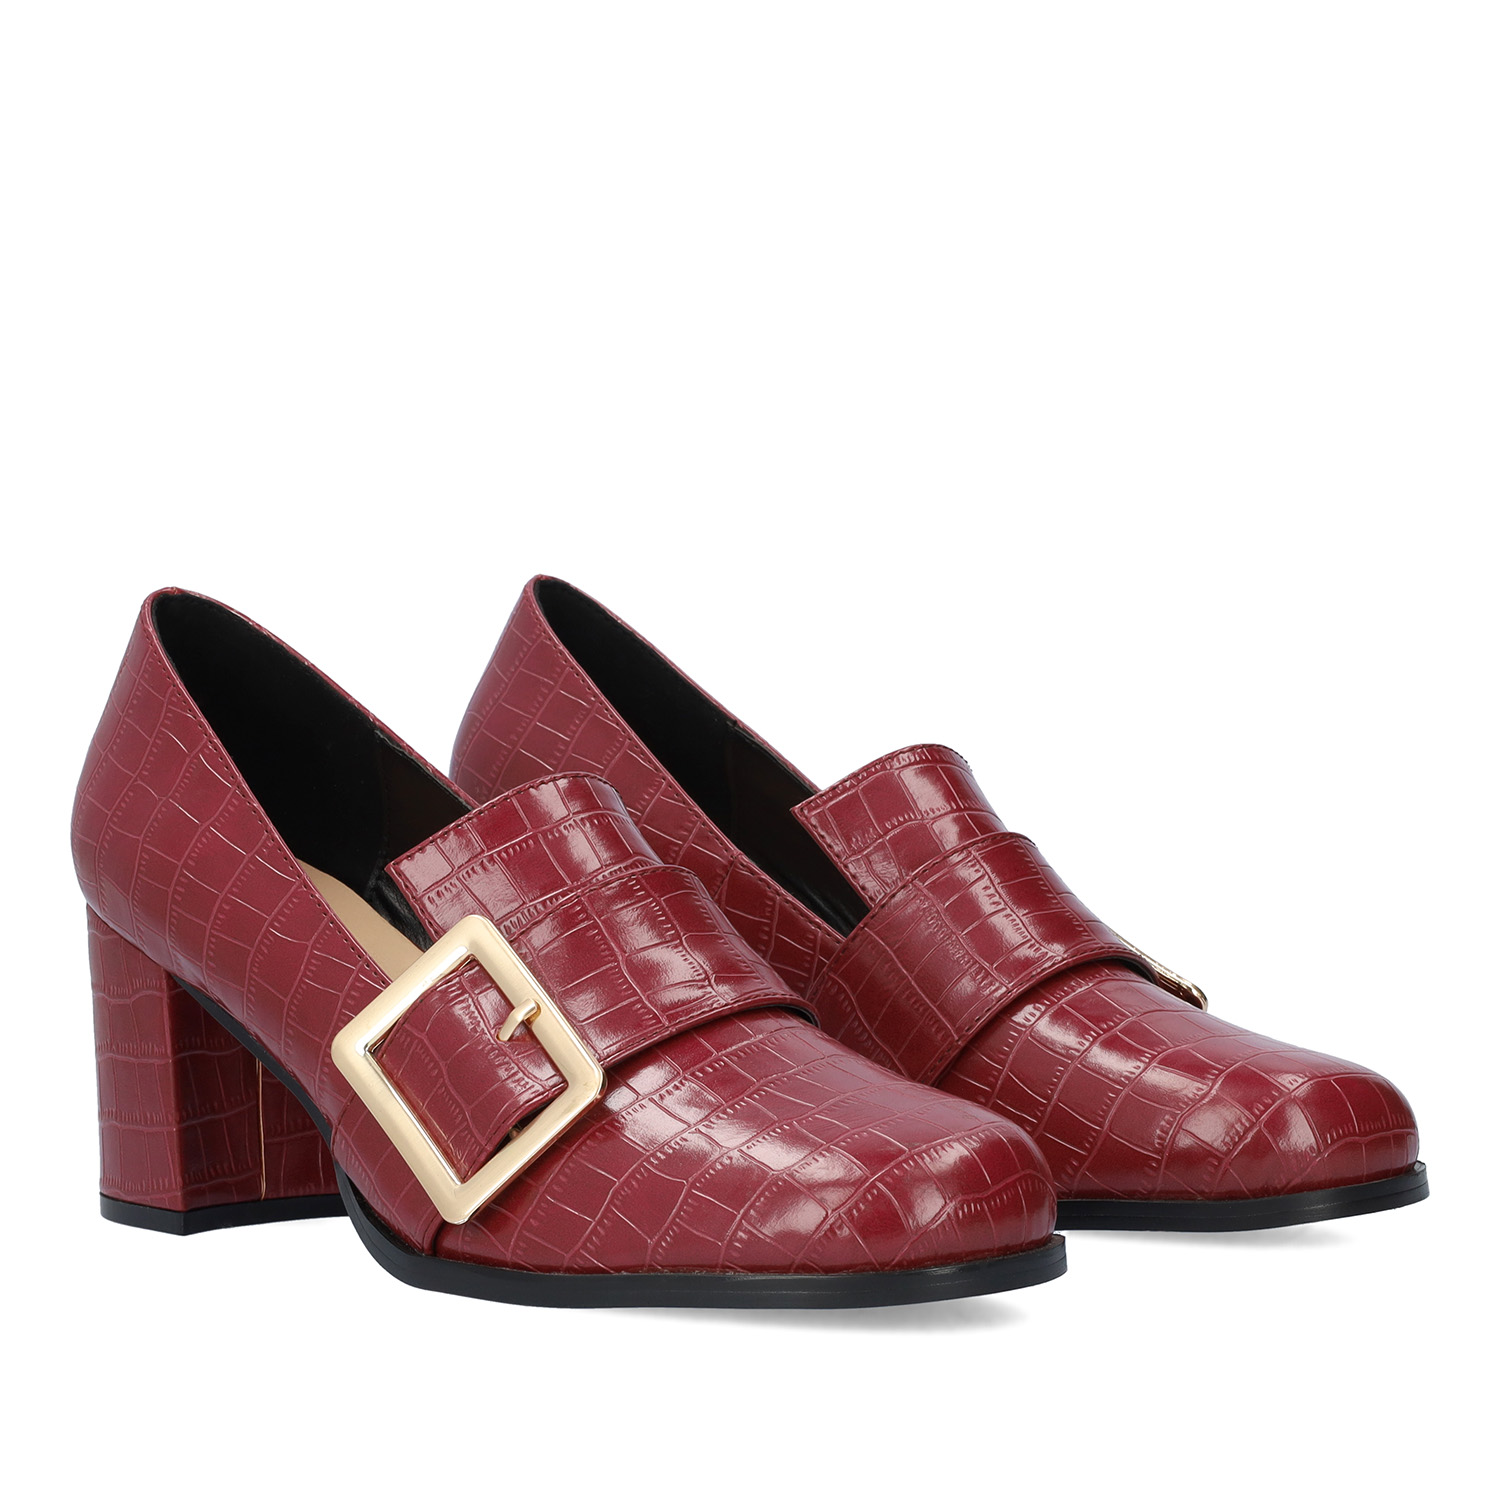 Heeled moccasins in burgundy faux croc leather and buckle detail 